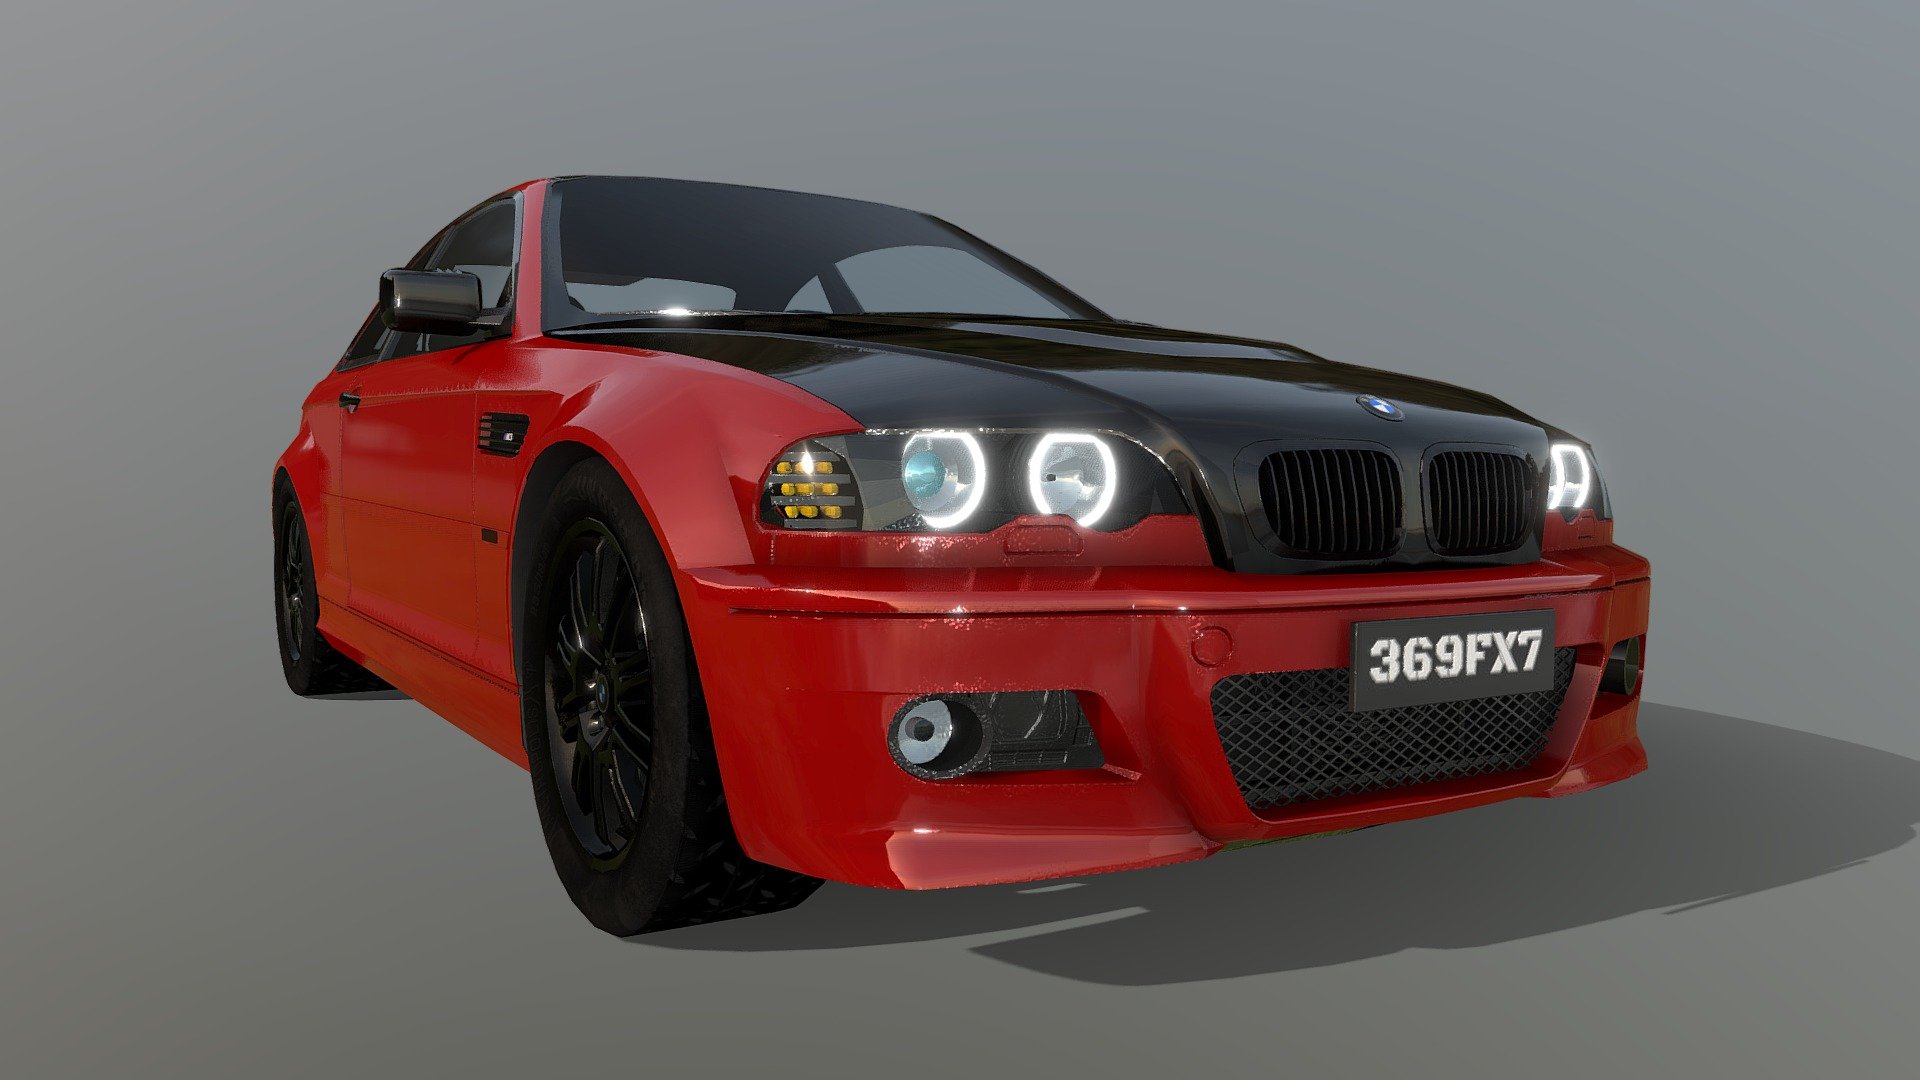 Ok last one! A colour combo I just had to try!

Feel free to use in your personal projects within the bounds of the Editorial License.

If you want this car for free the original model is downloadable from: https://sketchfab.com/3d-models/bmw-m3-e46-gtr-66314ceeeaf24508824dd574ad04aed2 I used extra parts from this model, maily interior: https://3dwarehouse.sketchup.com/model/c8d3dc95-096e-4f00-a133-28d1b88c3b0b/BMW-M3-E46-StanceNation?hl=en

Good luck making it look this good though 3d model